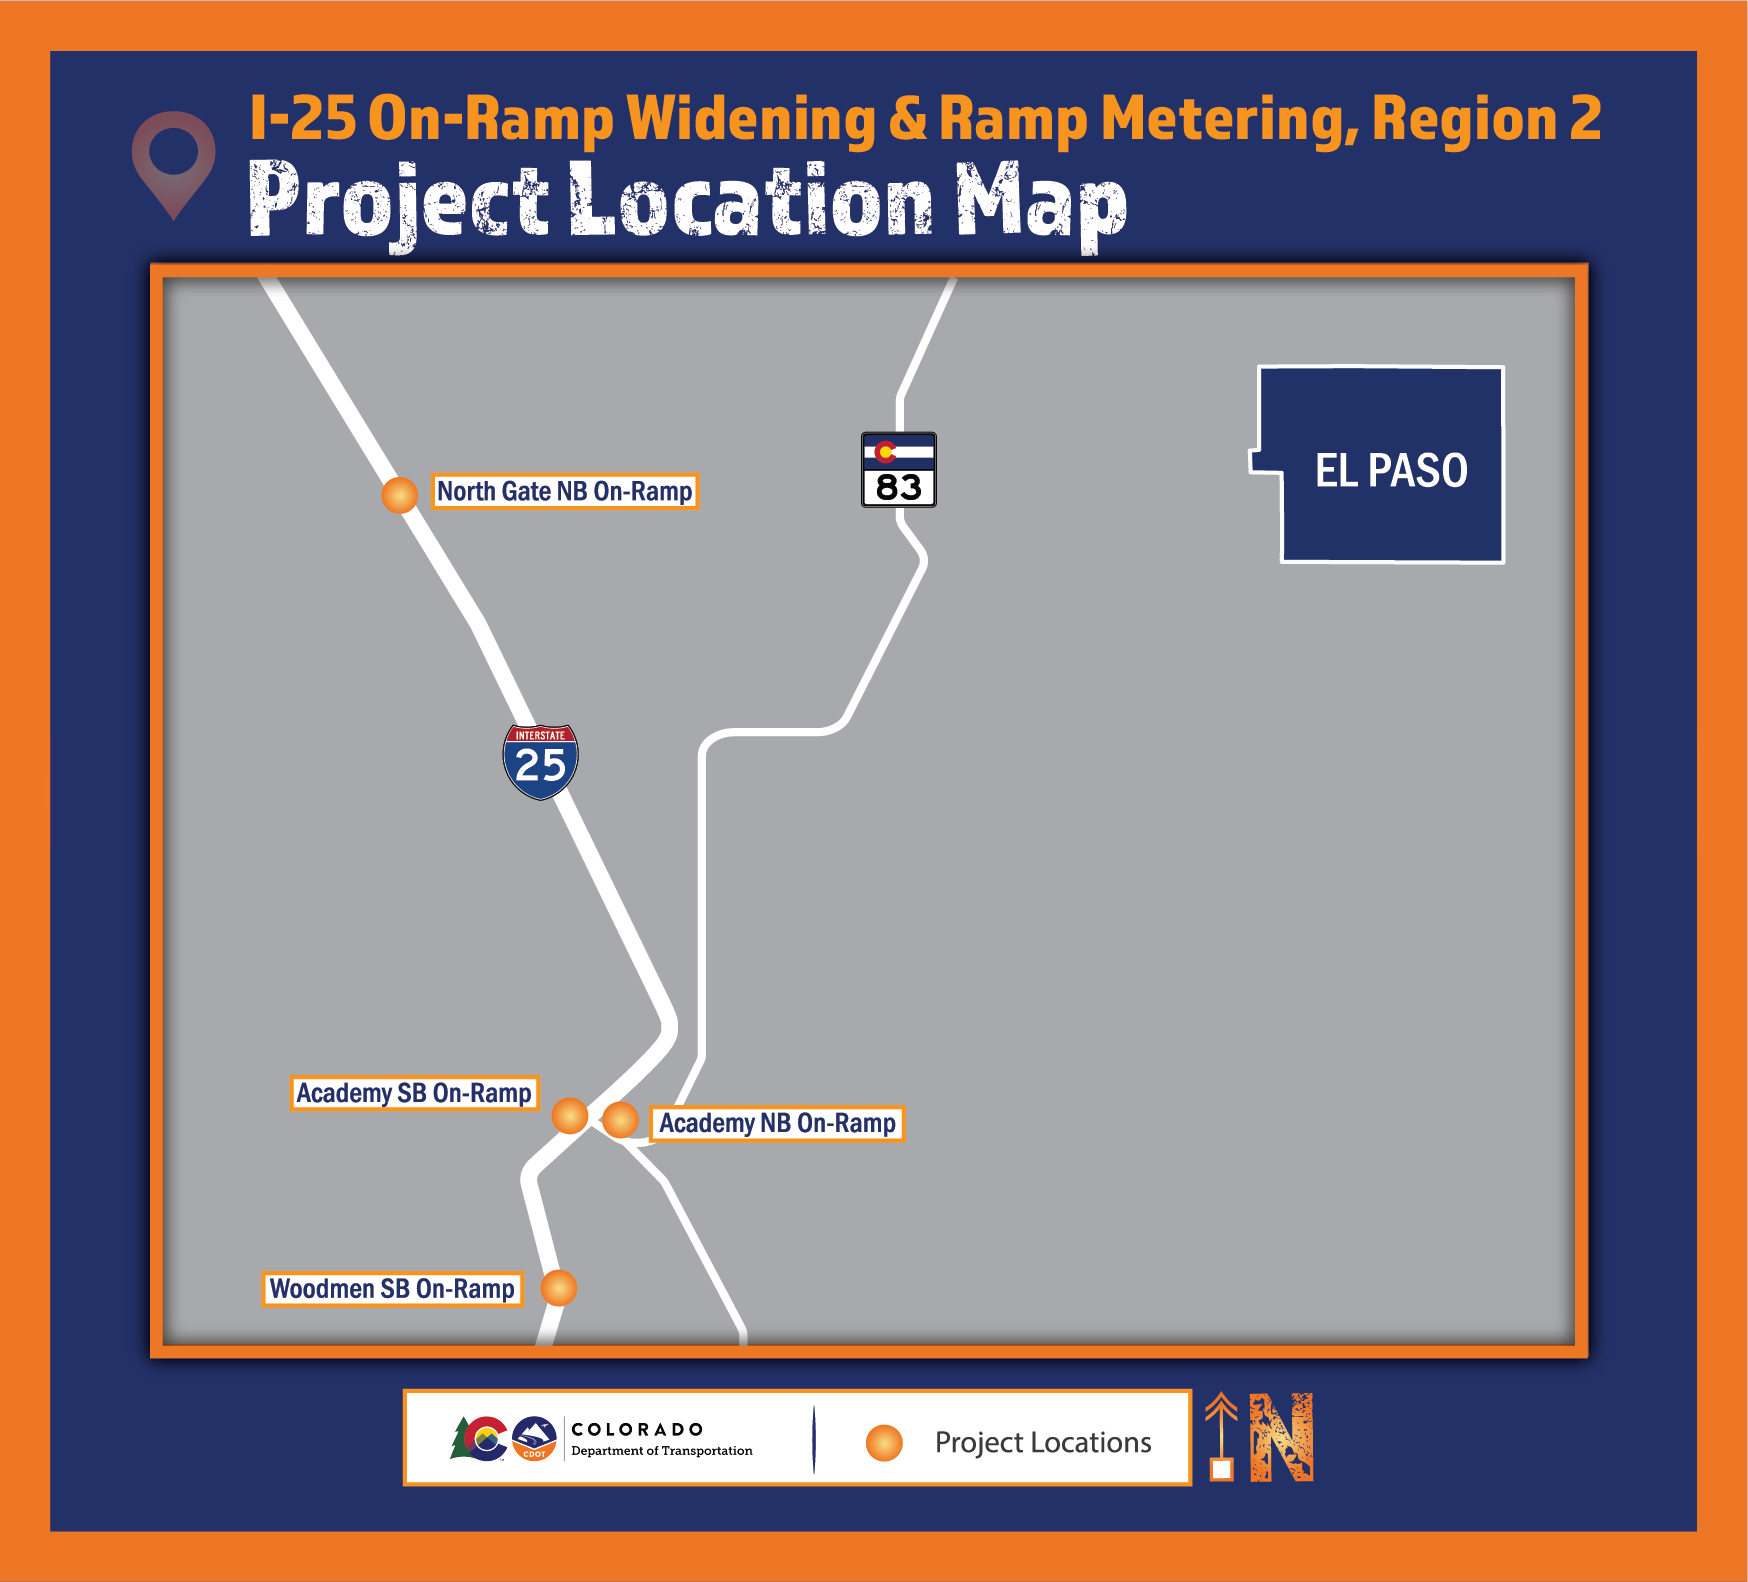 Ramp metering project map on I-25 in Colorado Springs detail image